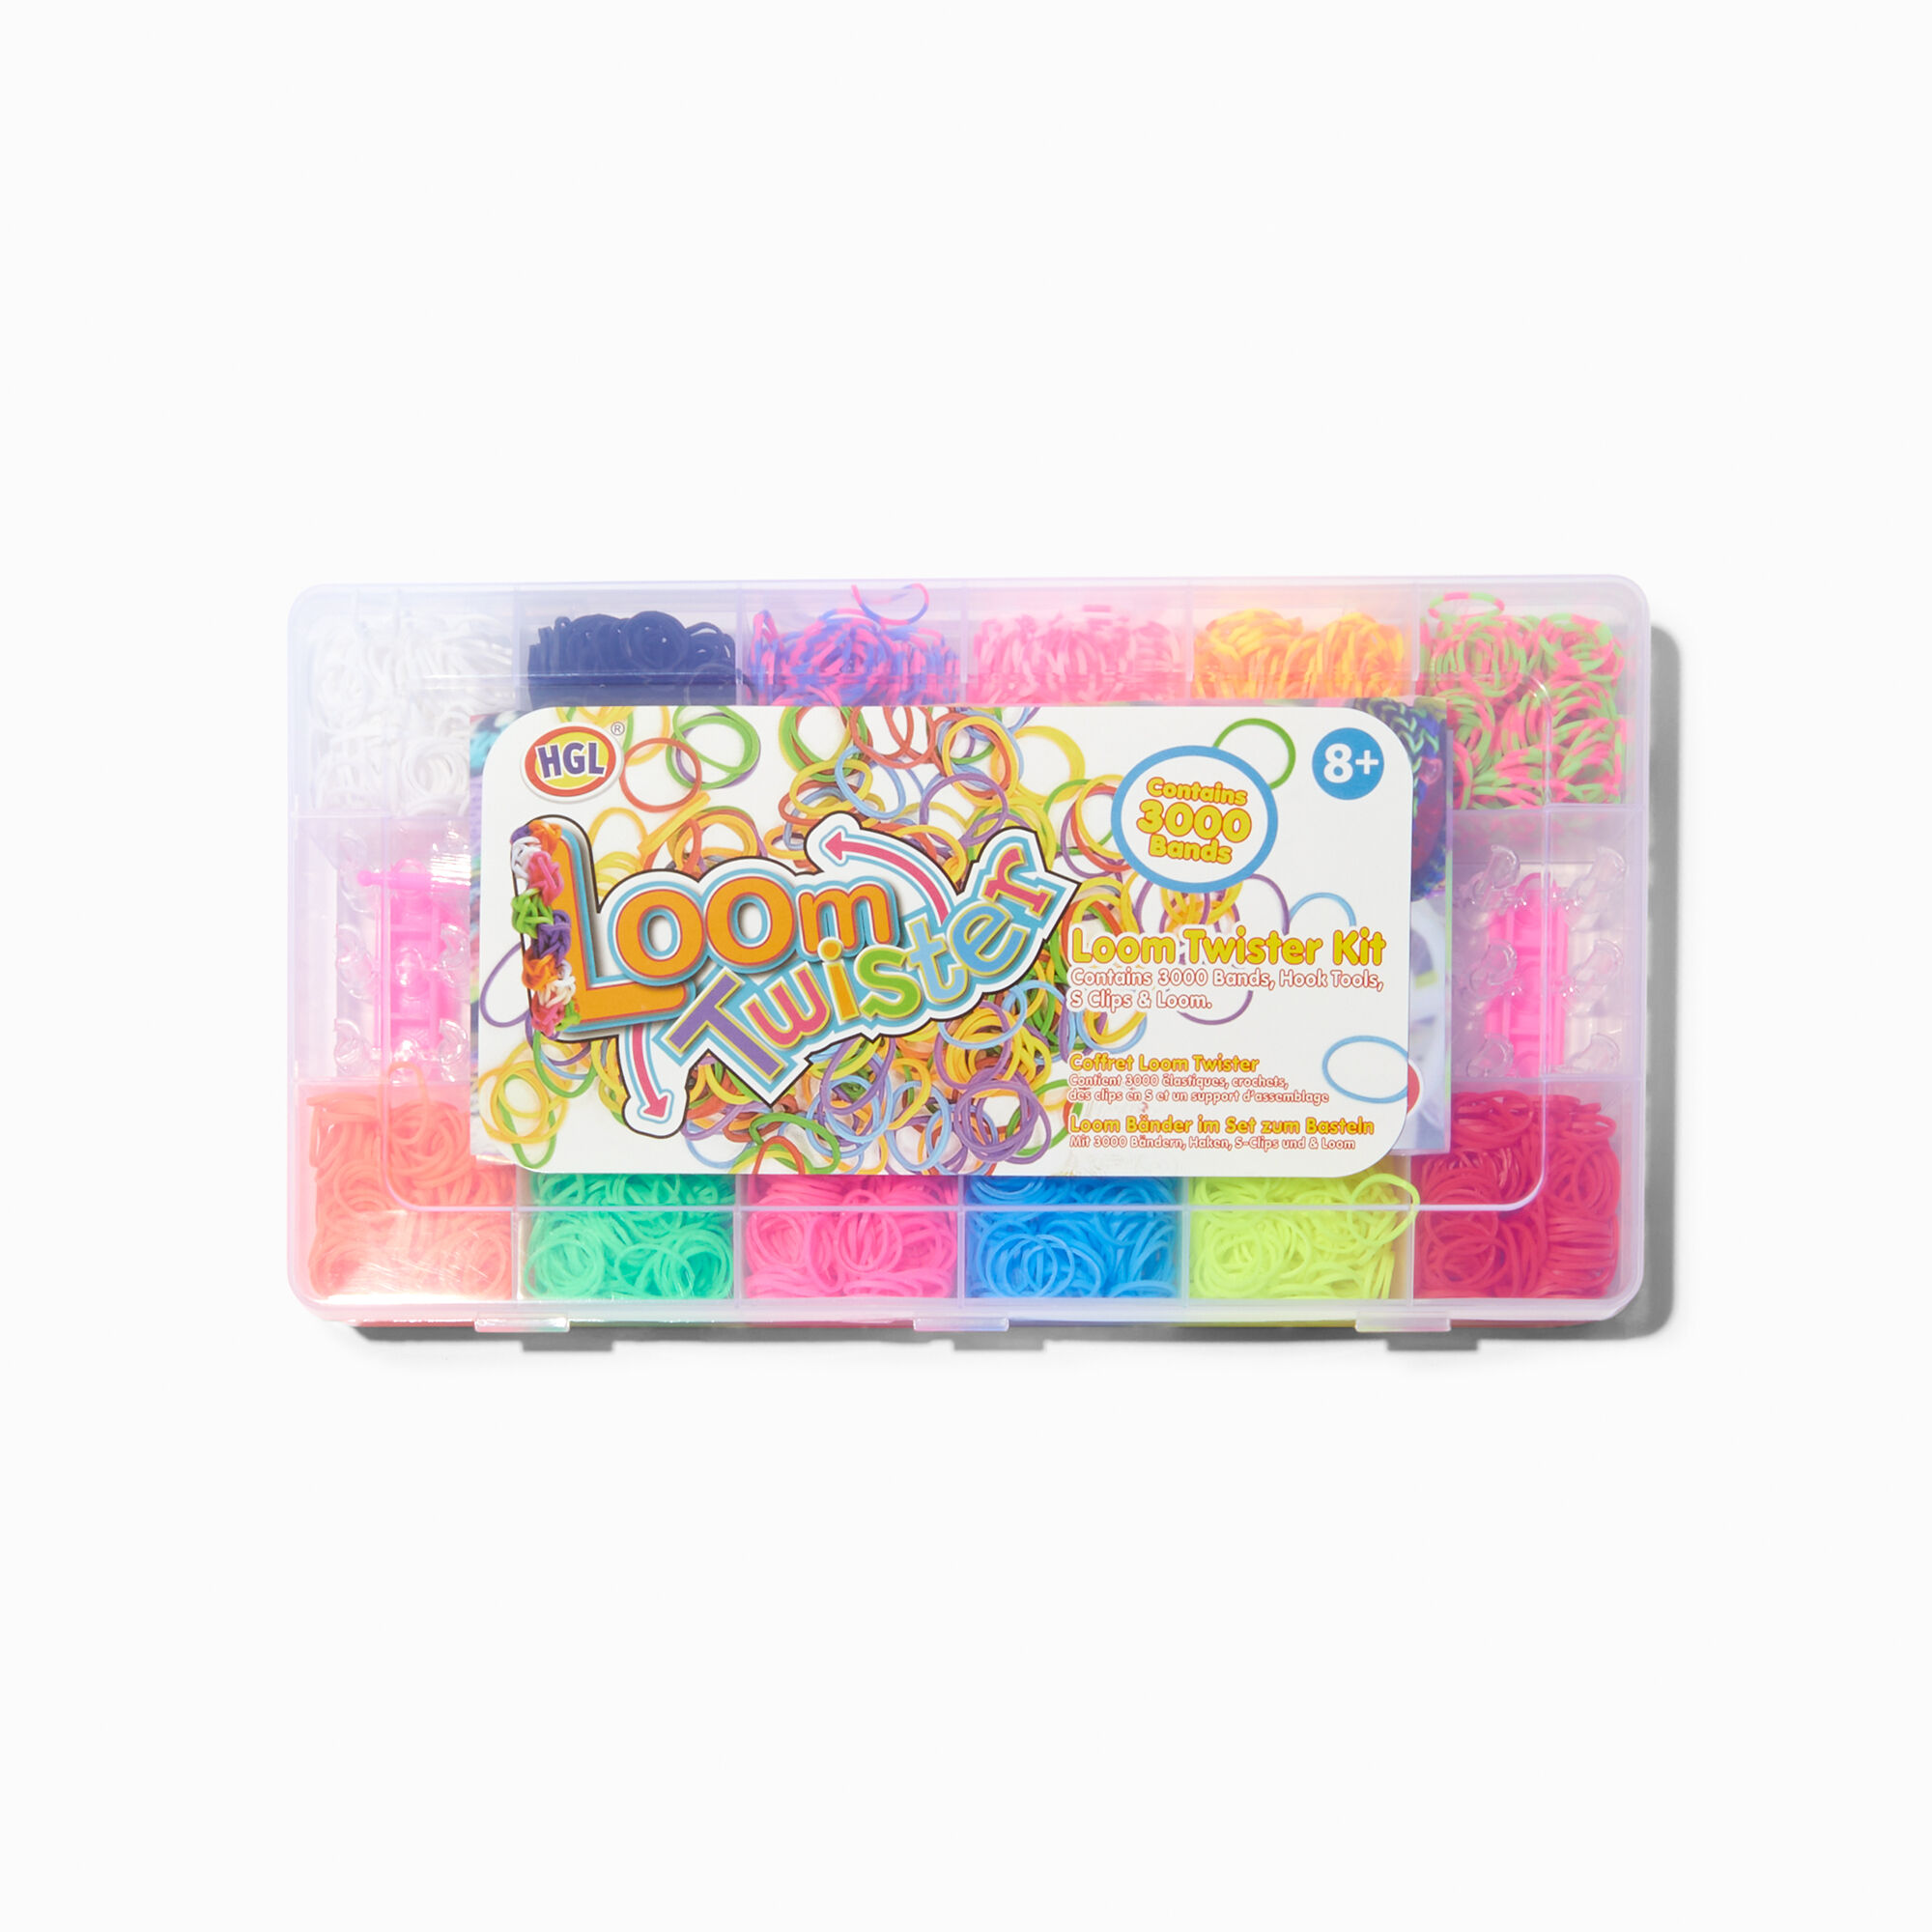 View Claires Loom Twister Bands Kit Rainbow information